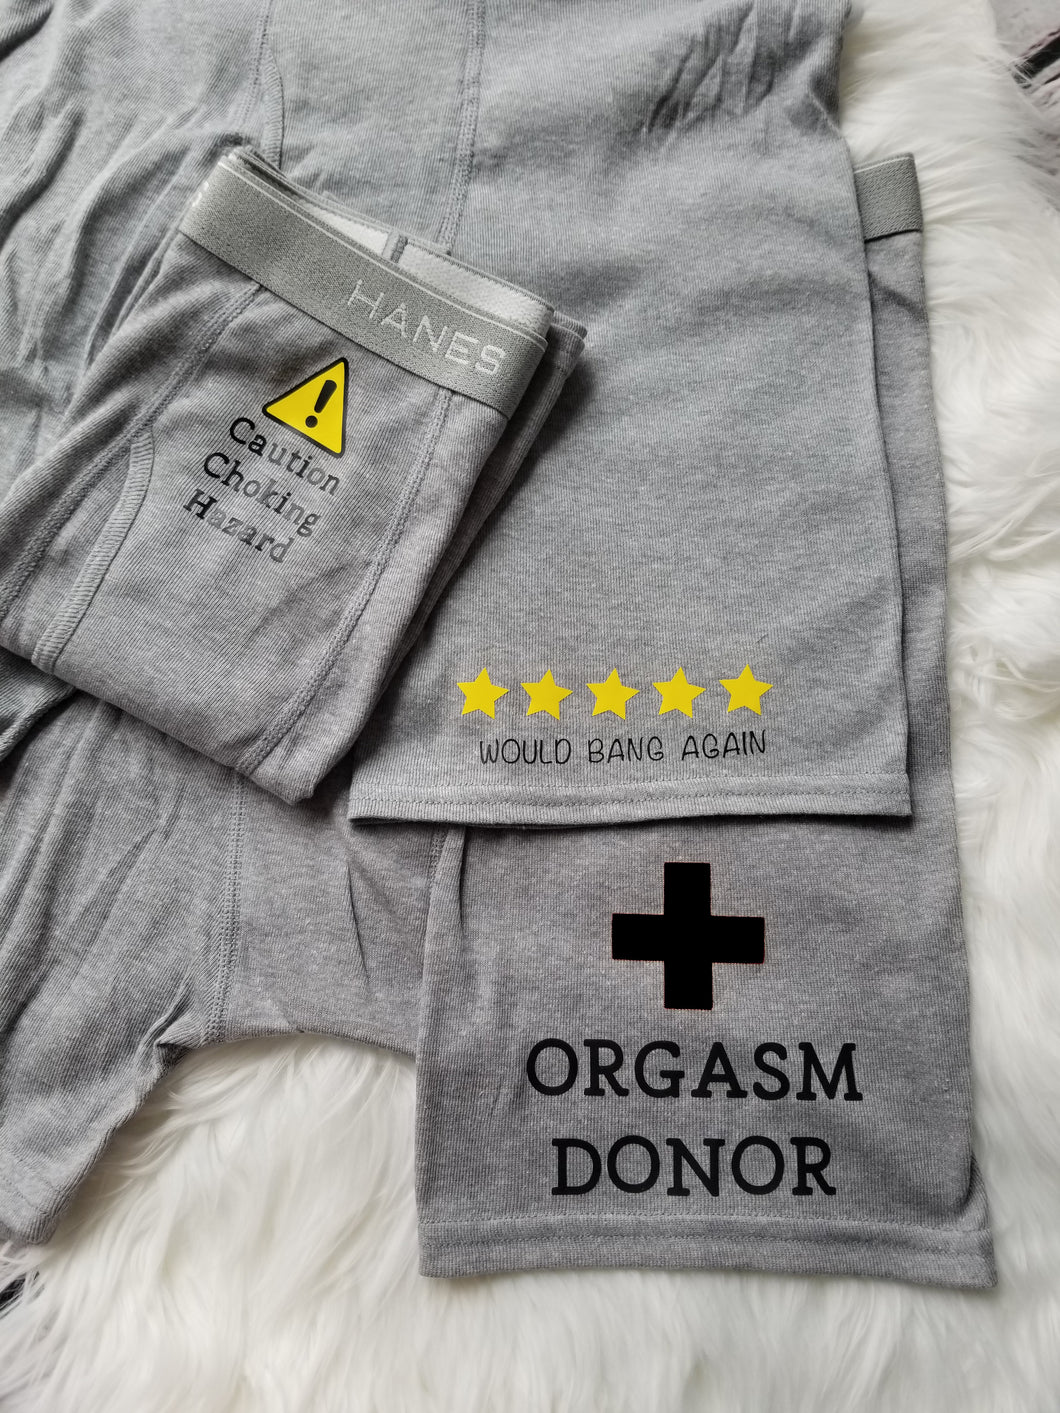 3 Pack Boxer Briefs, Funny Gift Set for Him, Caution Choking Hazard, Orgasm Donor, 5 Stars Would Bang Again